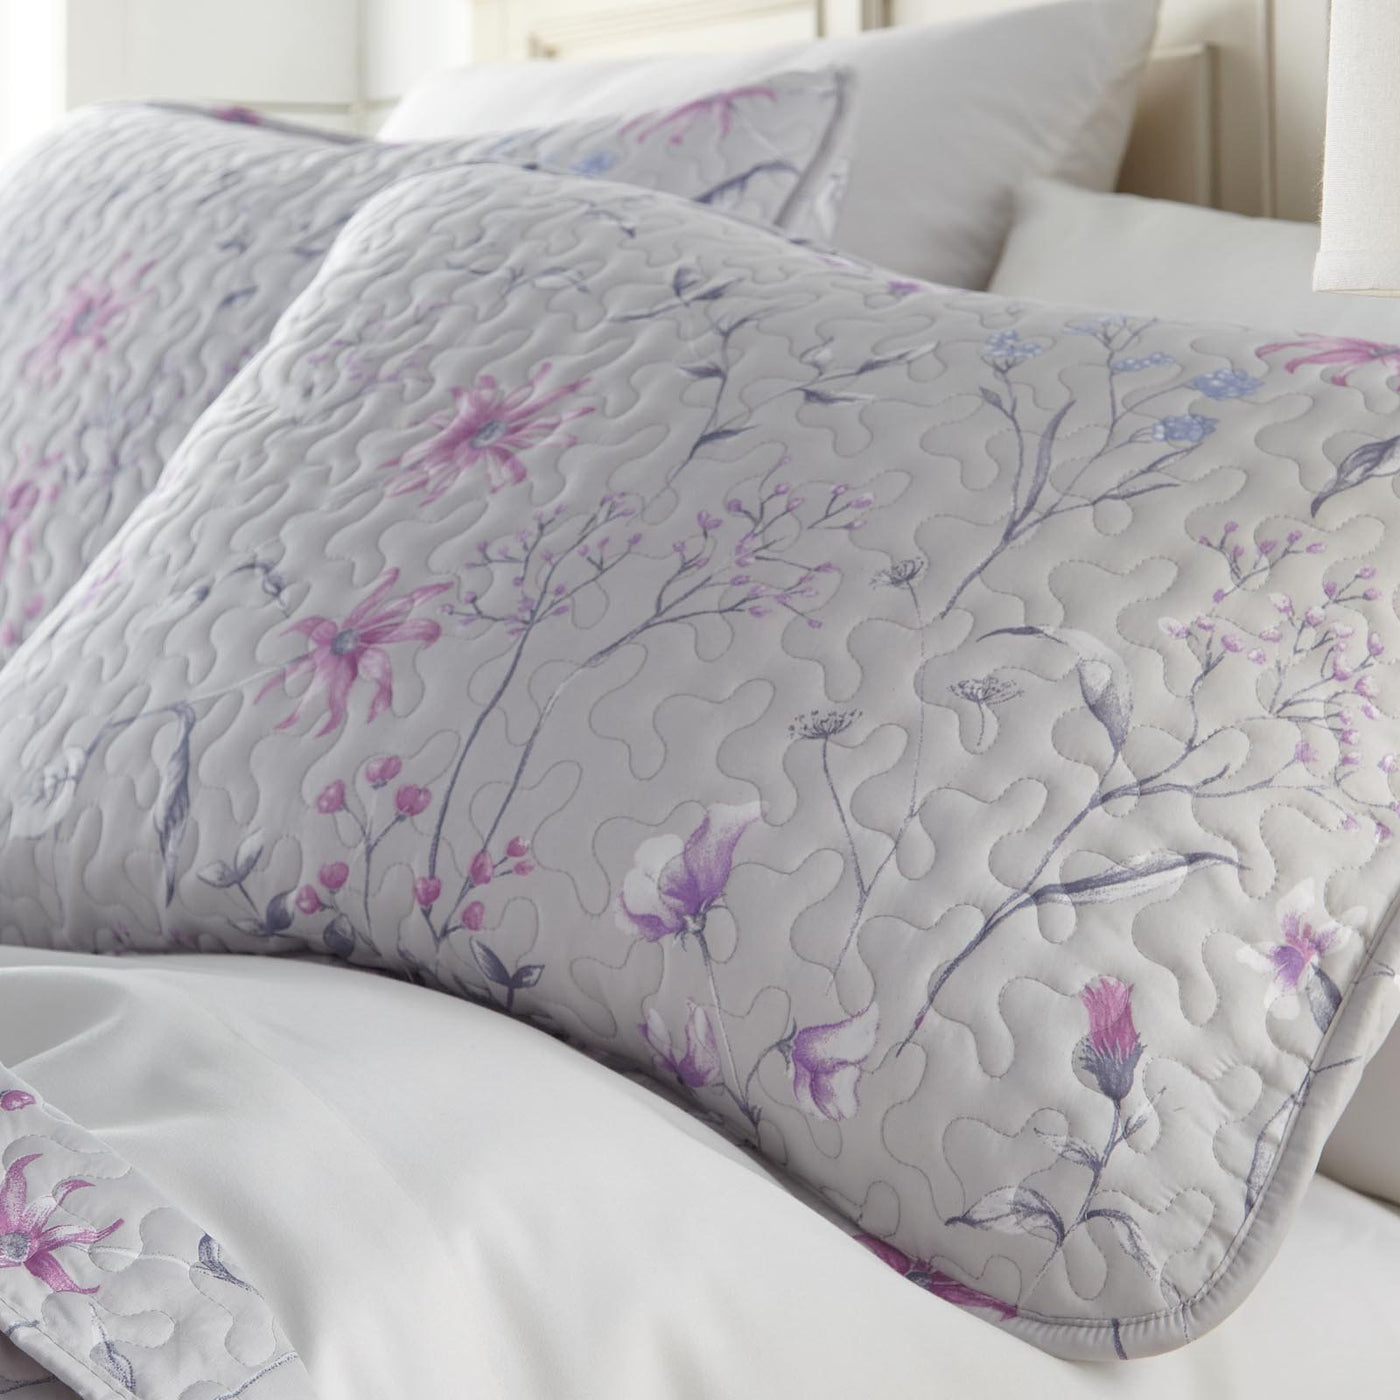 Floral Daydream in grey floral print quilt set